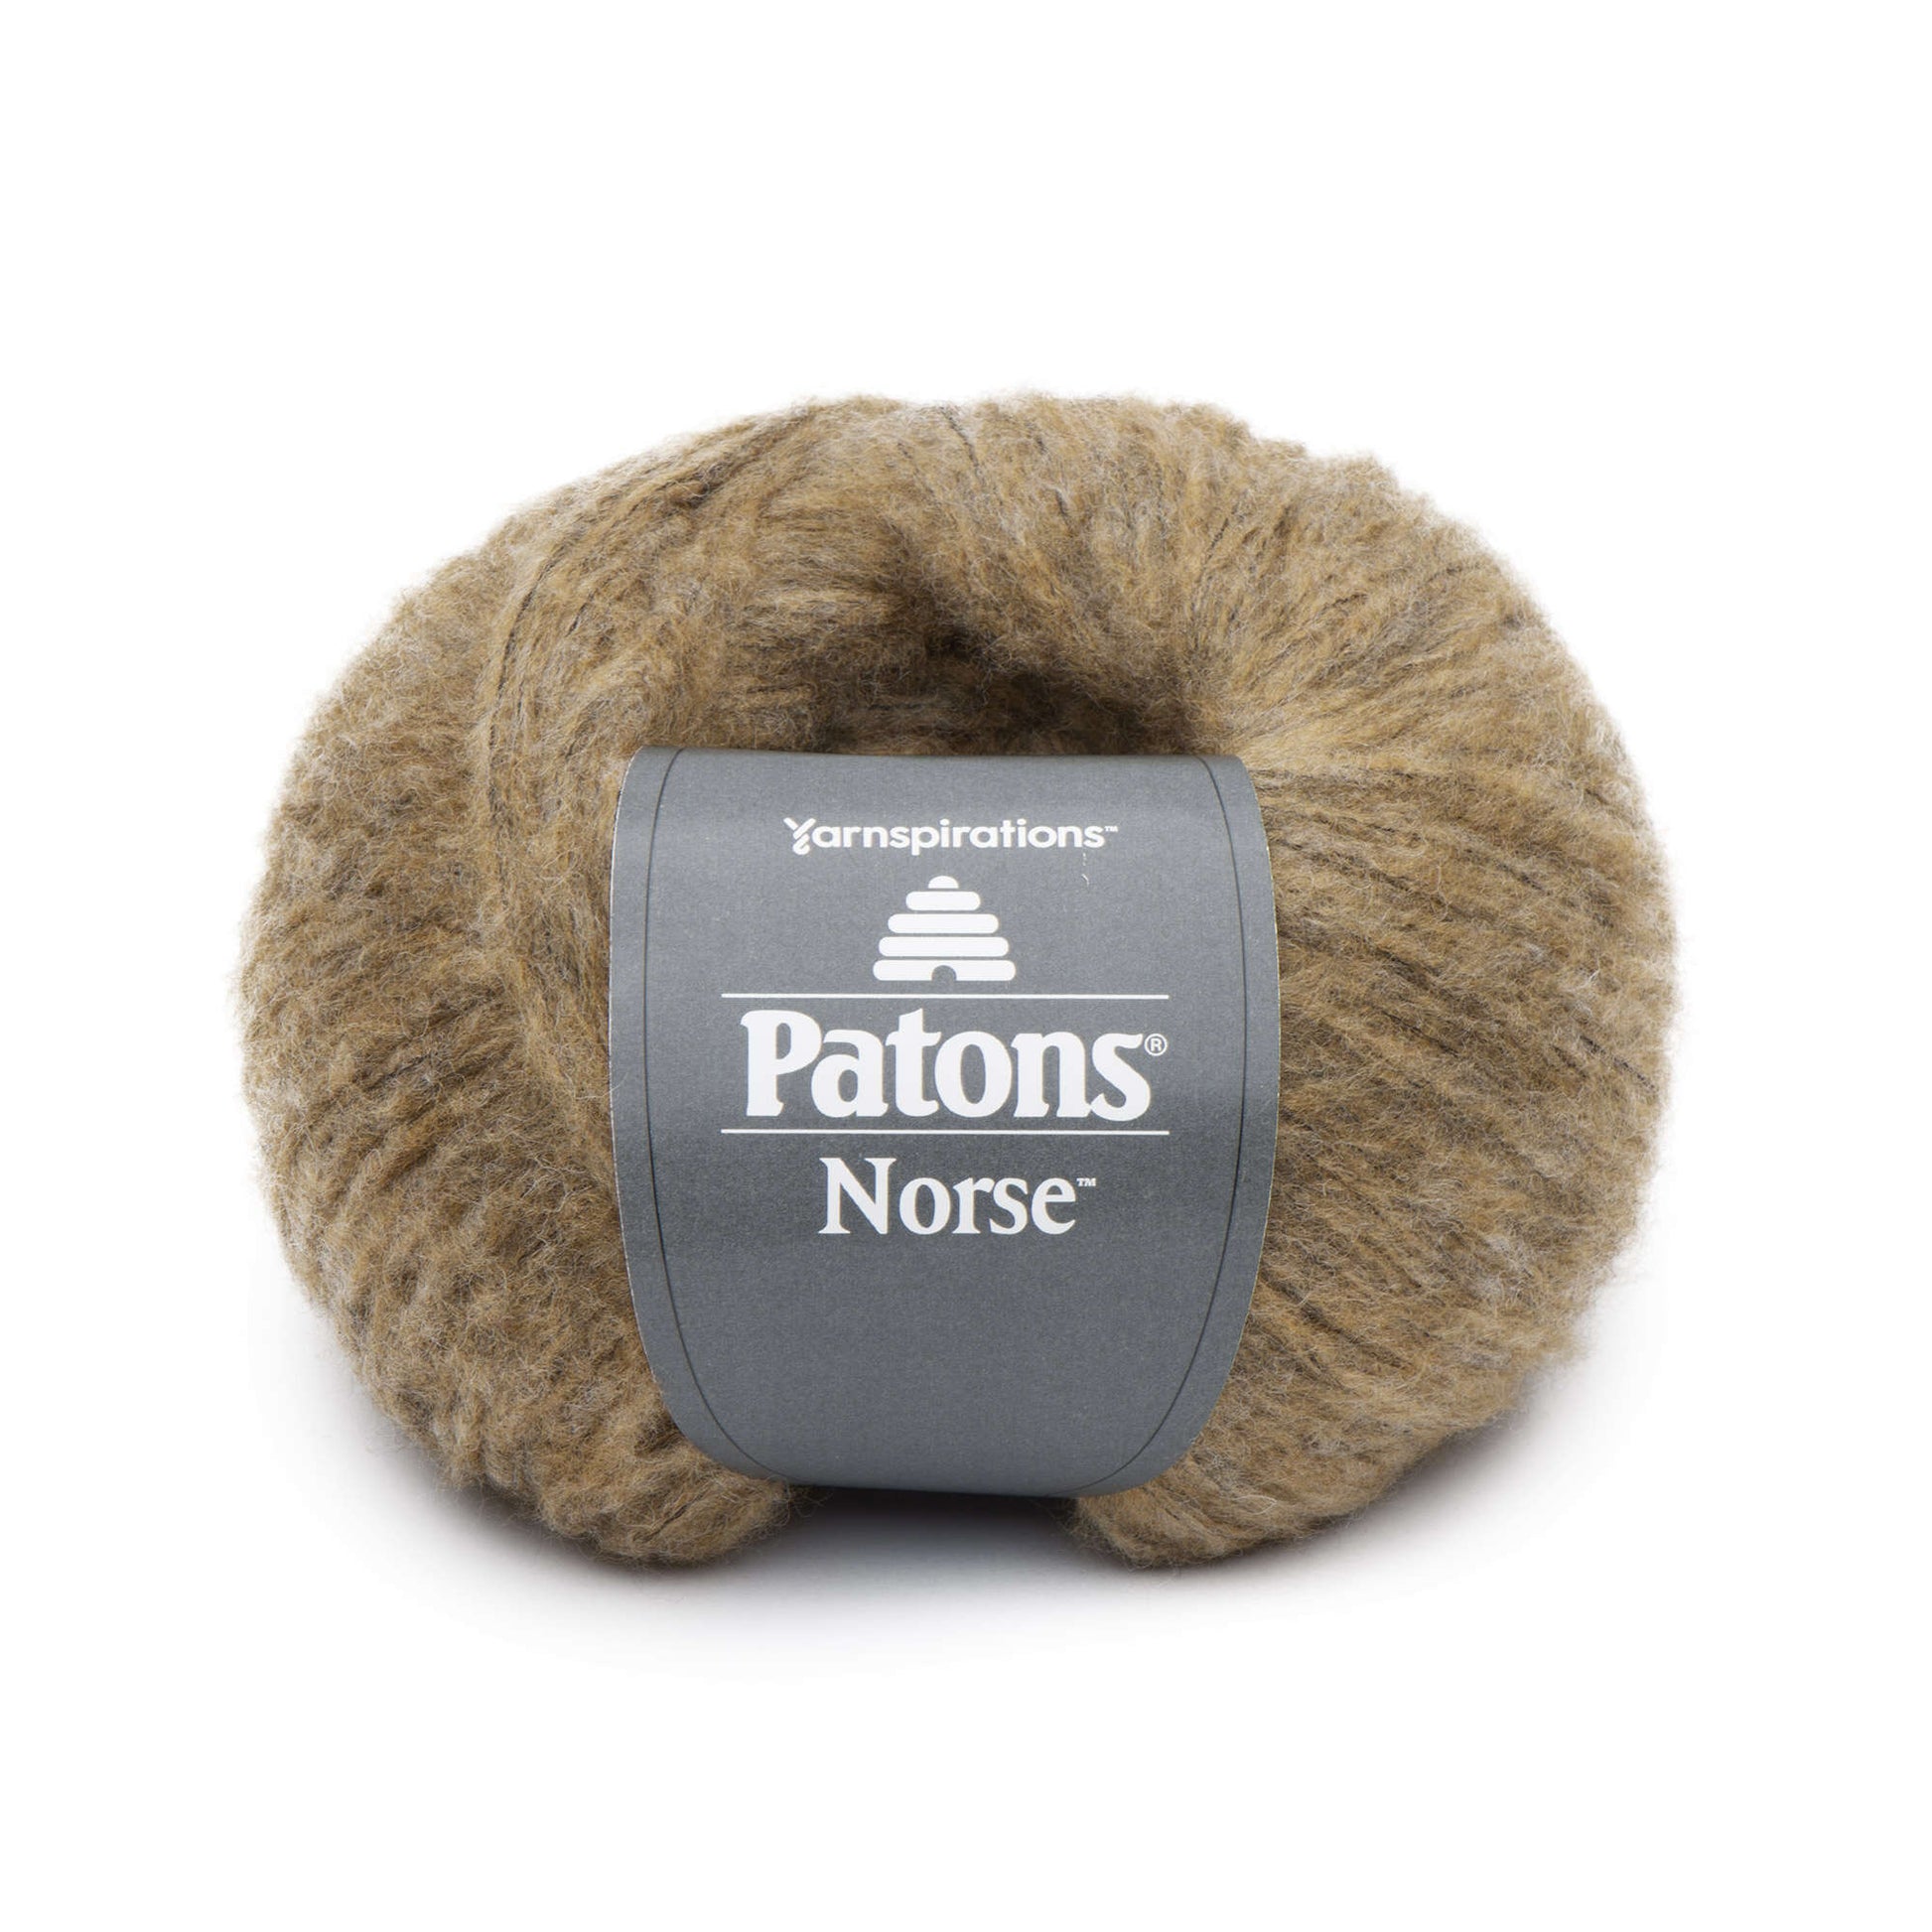 Patons Norse Yarn - Clearance shades Sunflower